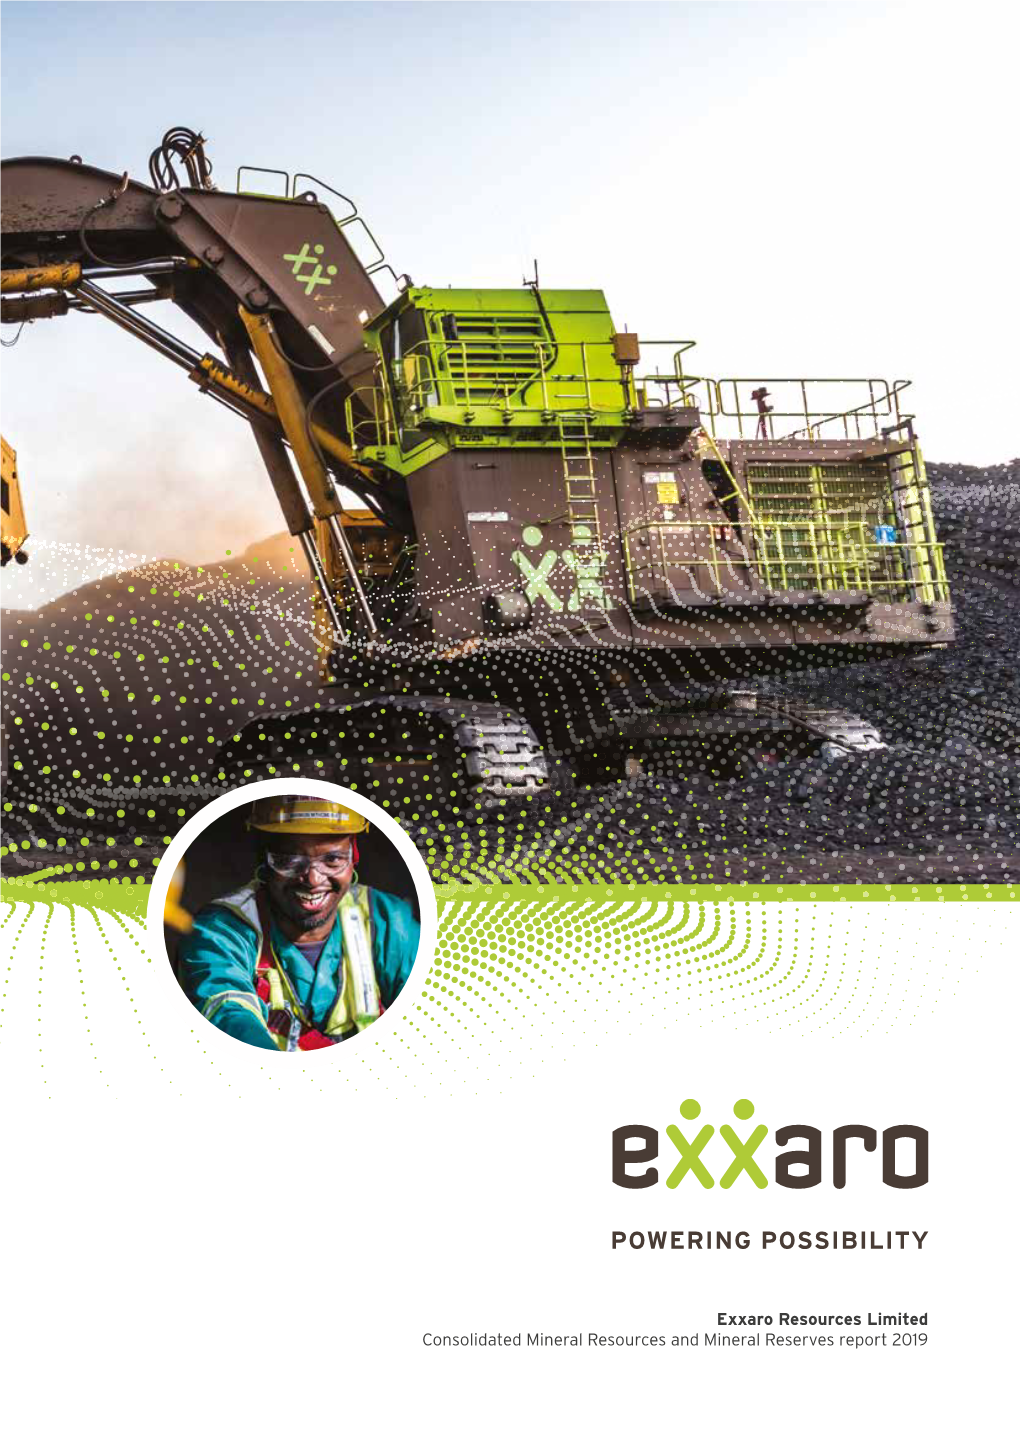 Exxaro Resources Limited Consolidated Mineral Resources and Mineral Reserves Report 2019